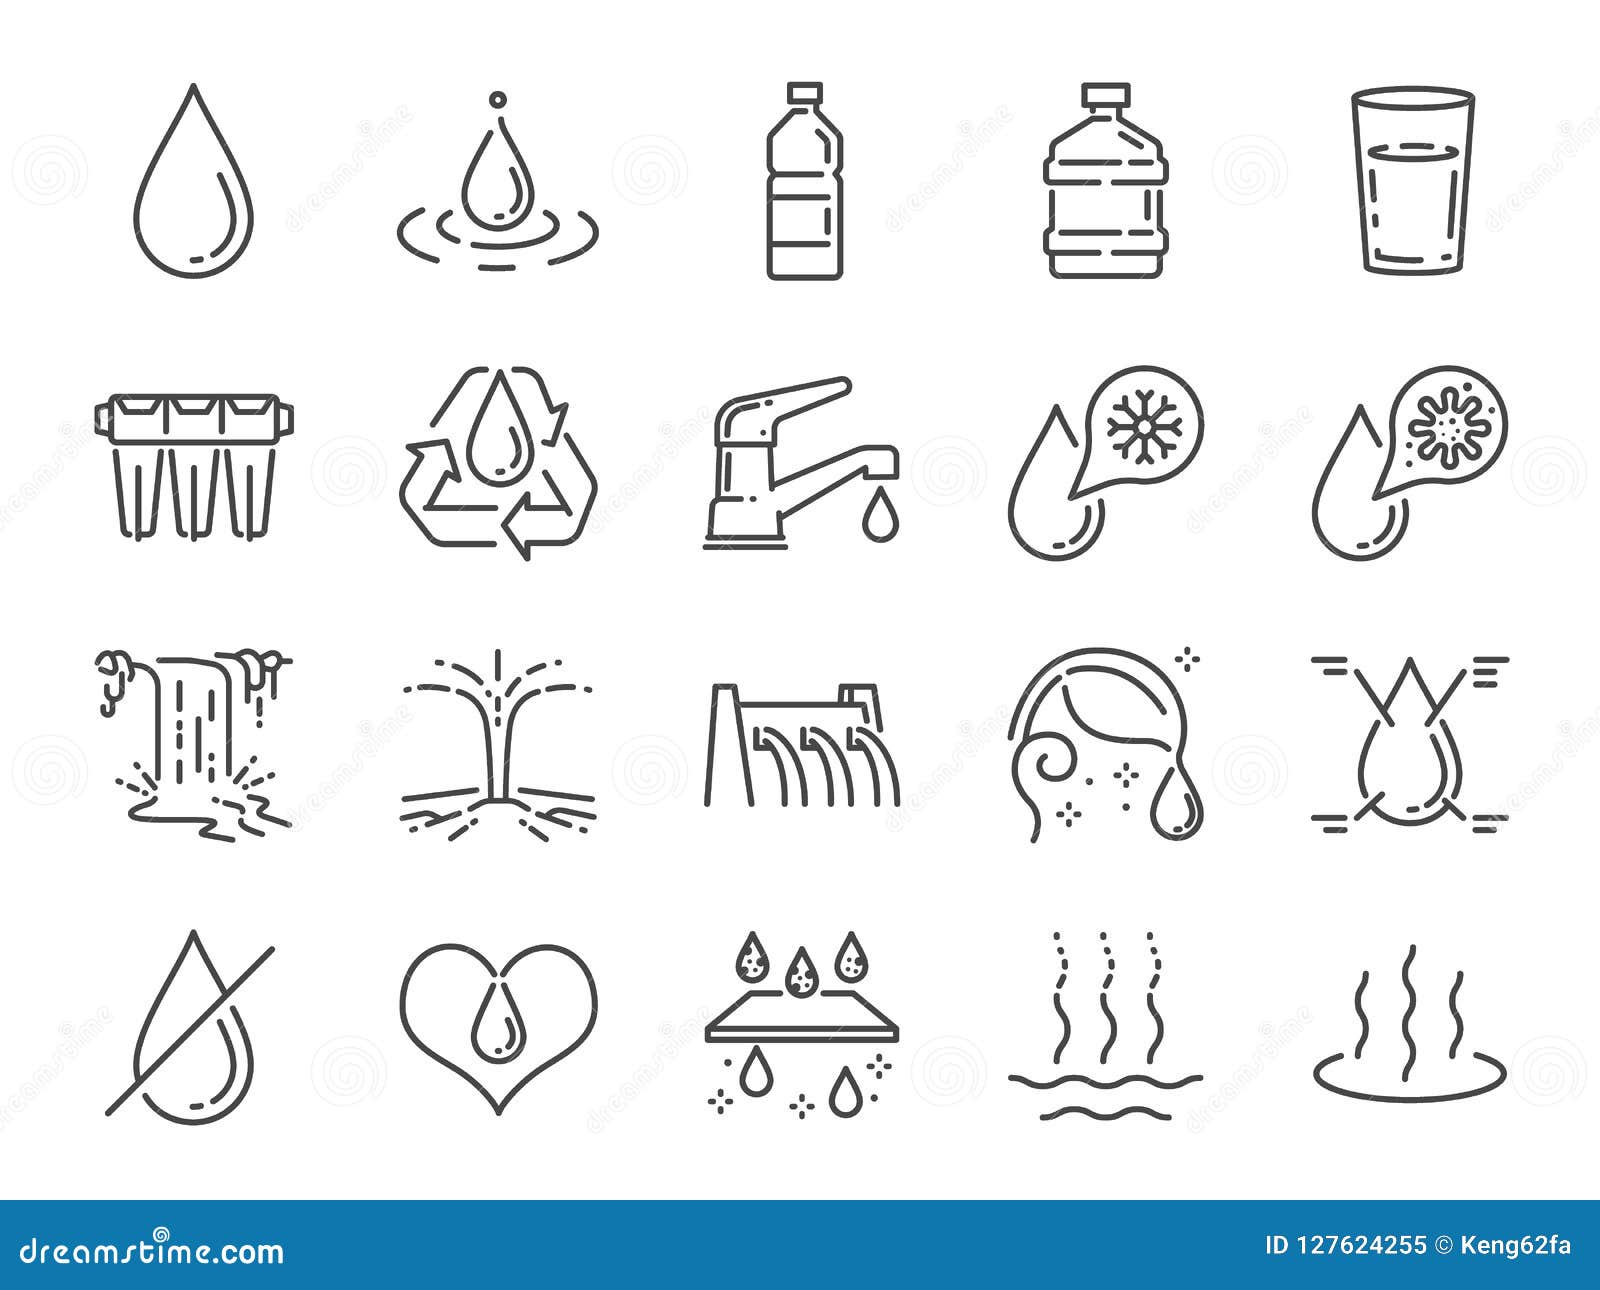 water icon set. included icons as water drop, moisture, liquid, bottle, litter and more.